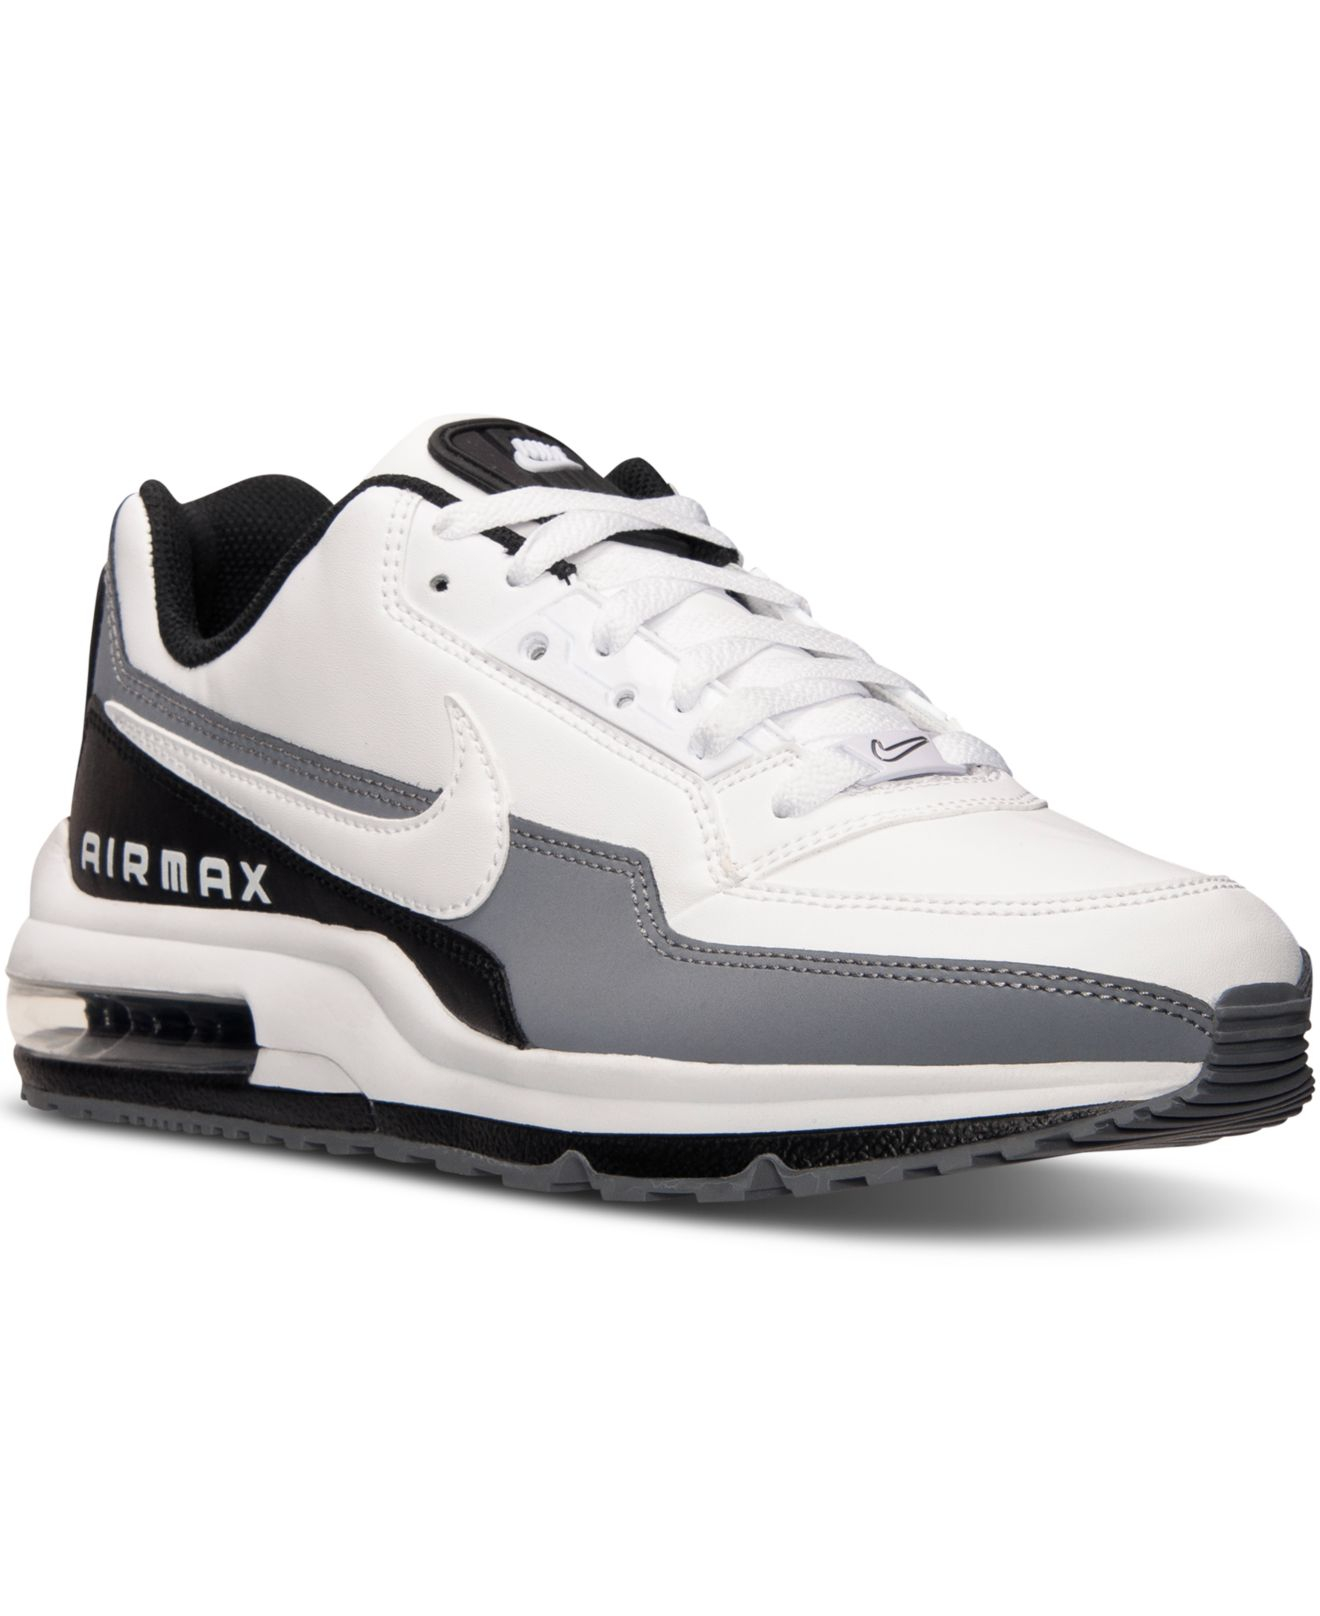 Nike Leather Men's Air Max Ltd 3 Running Sneakers From